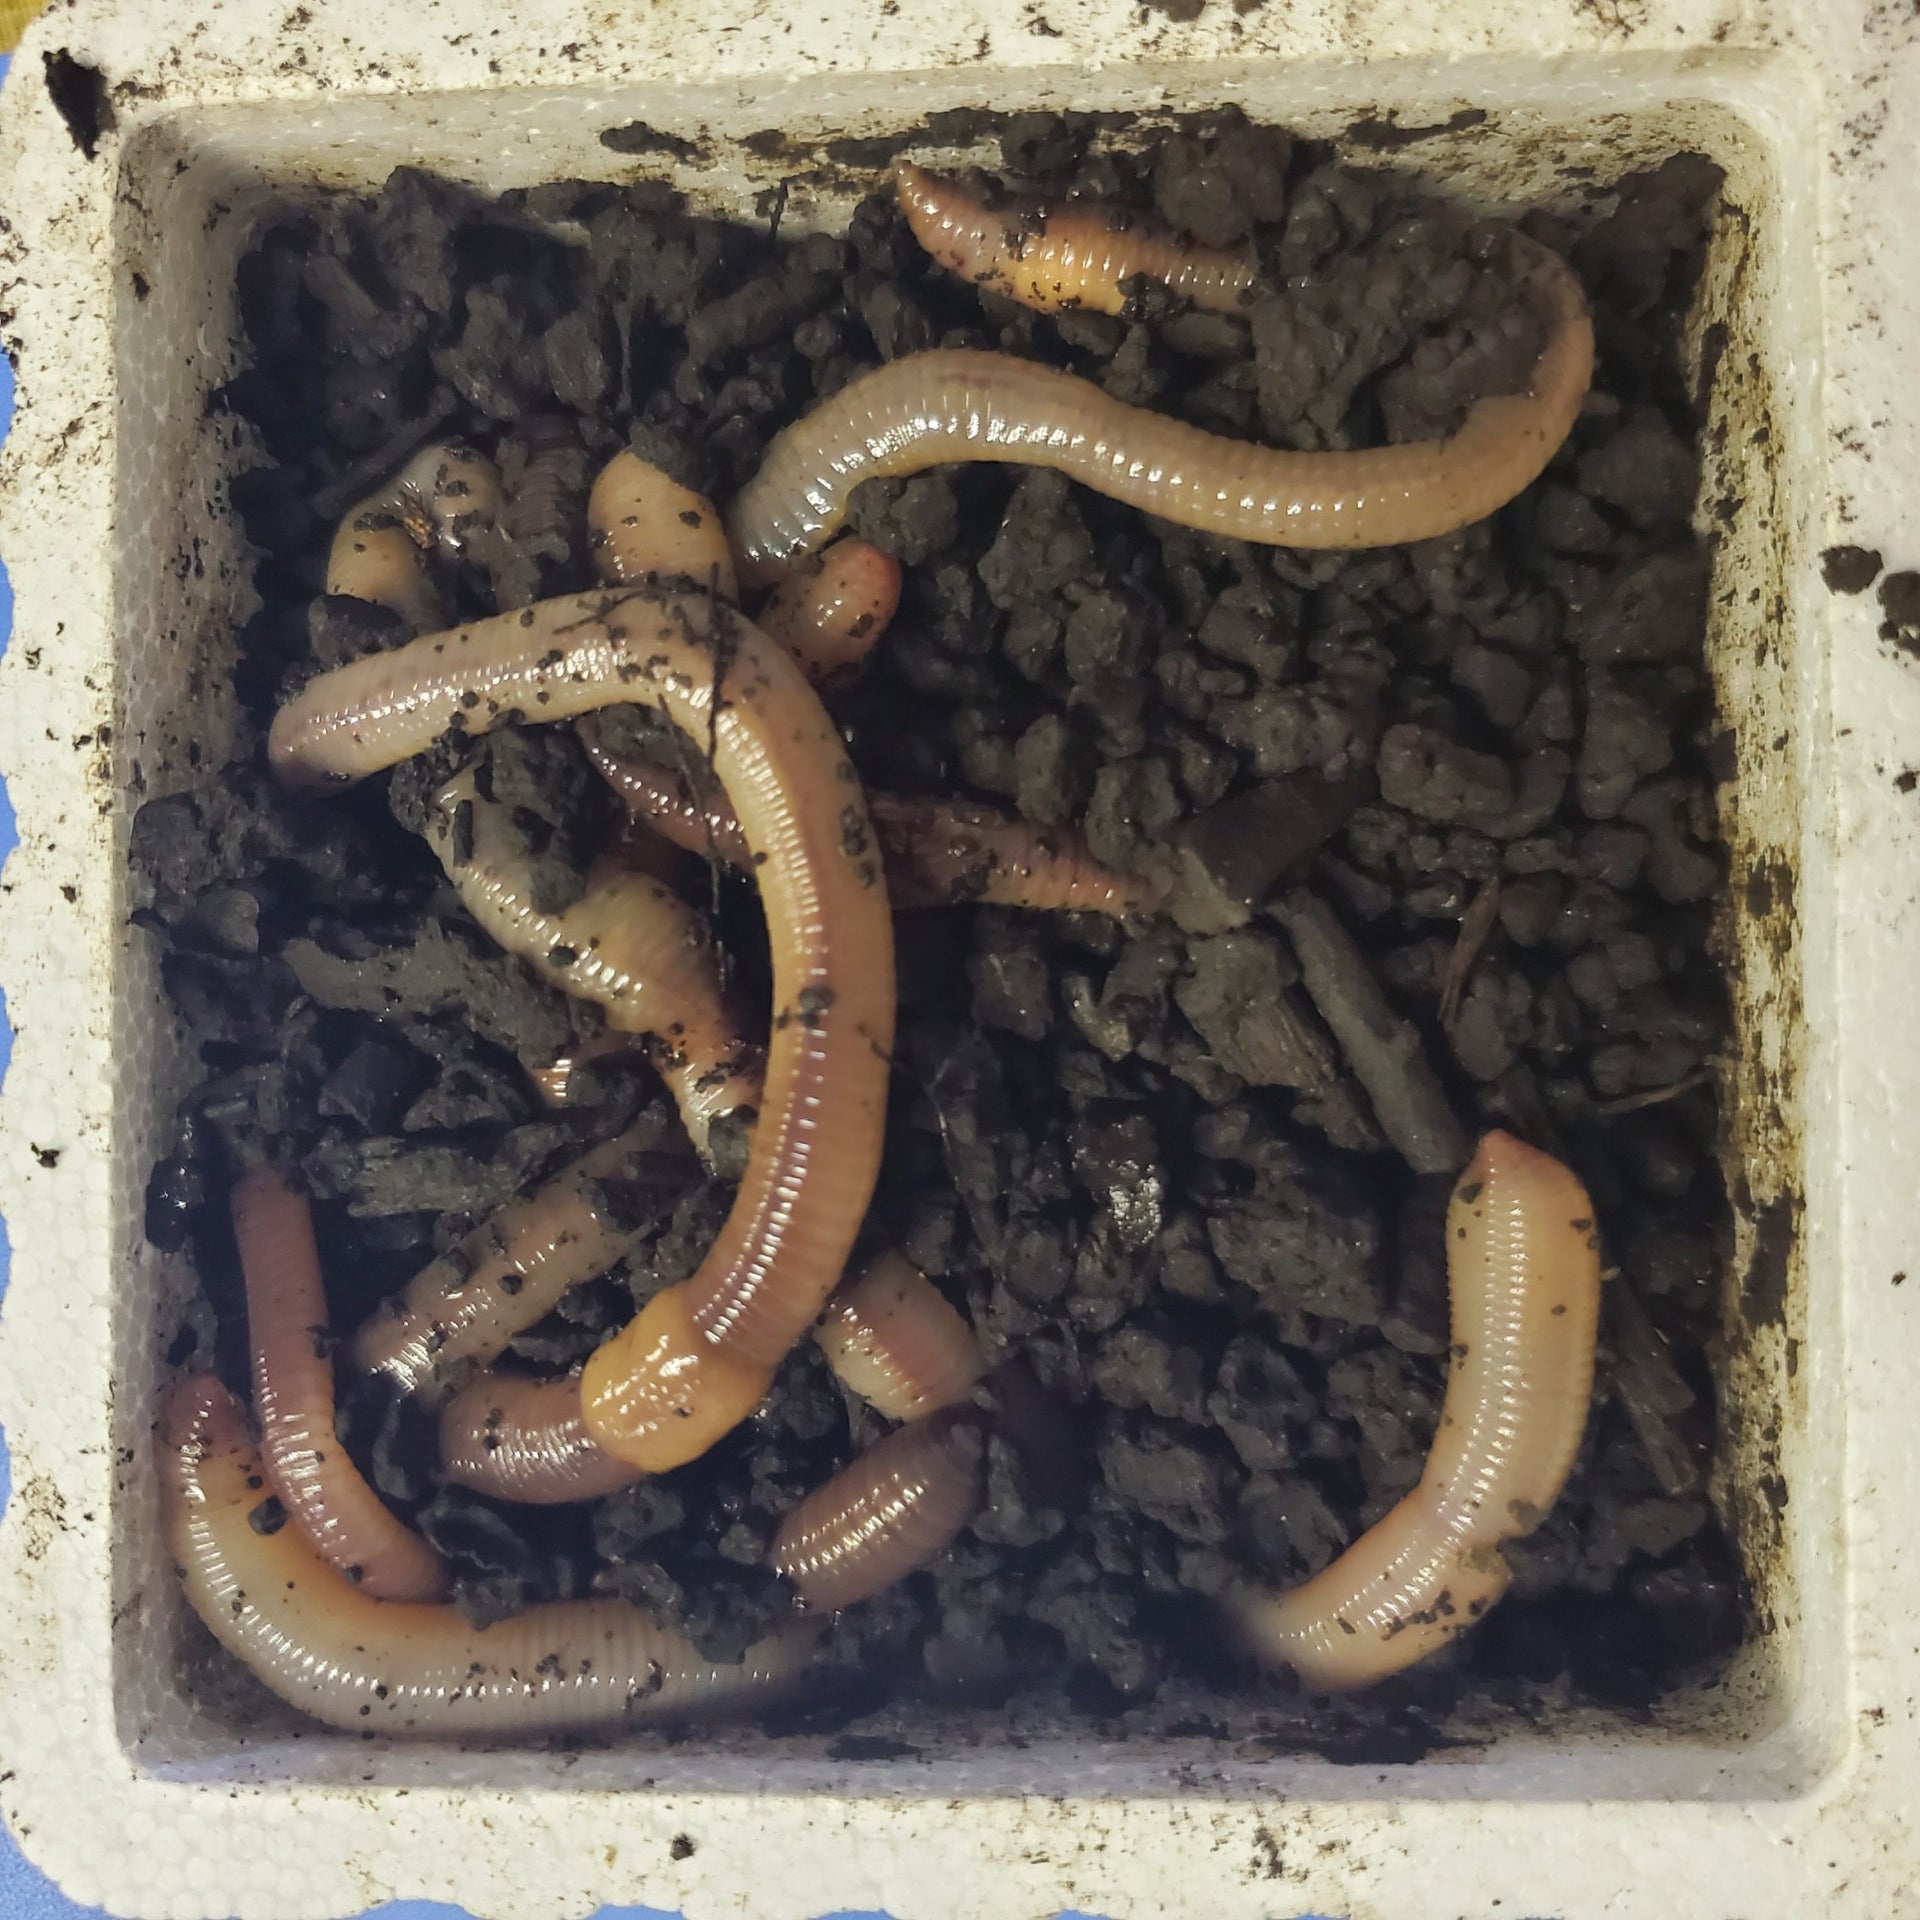 Nightcrawler Worms / Cup (10-12 worms) ·